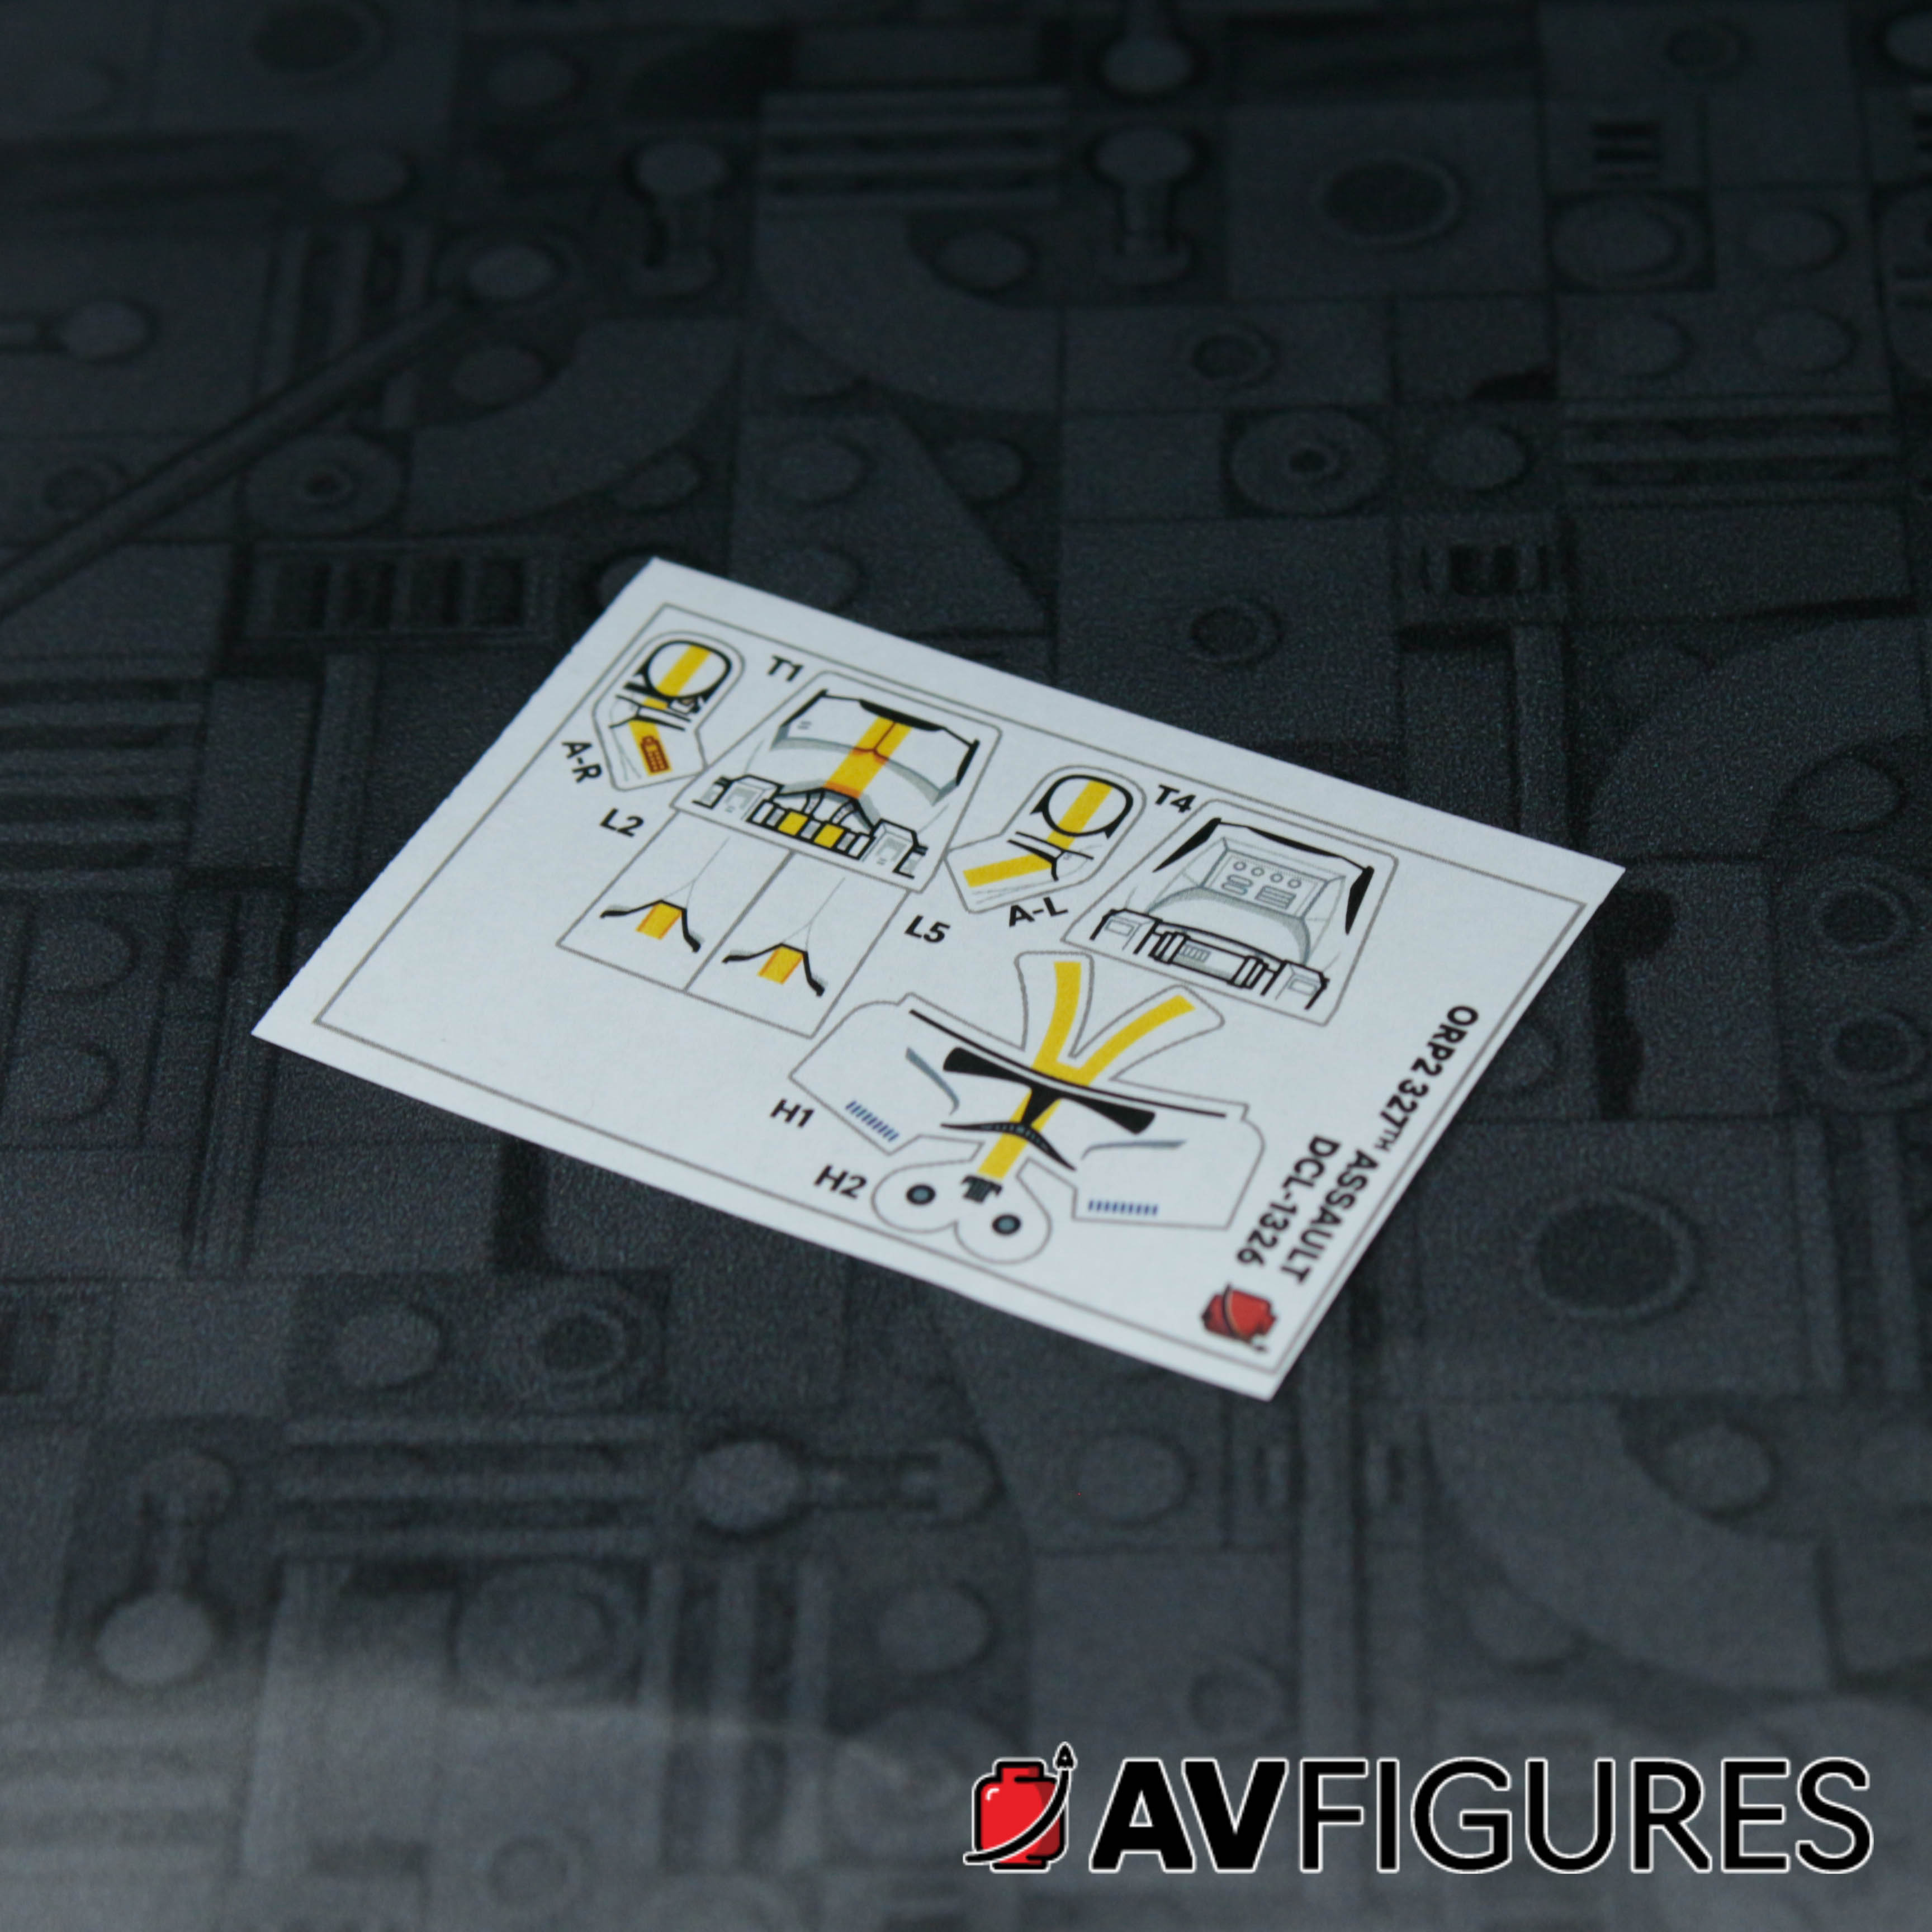 Official-style 327th Assault Decals